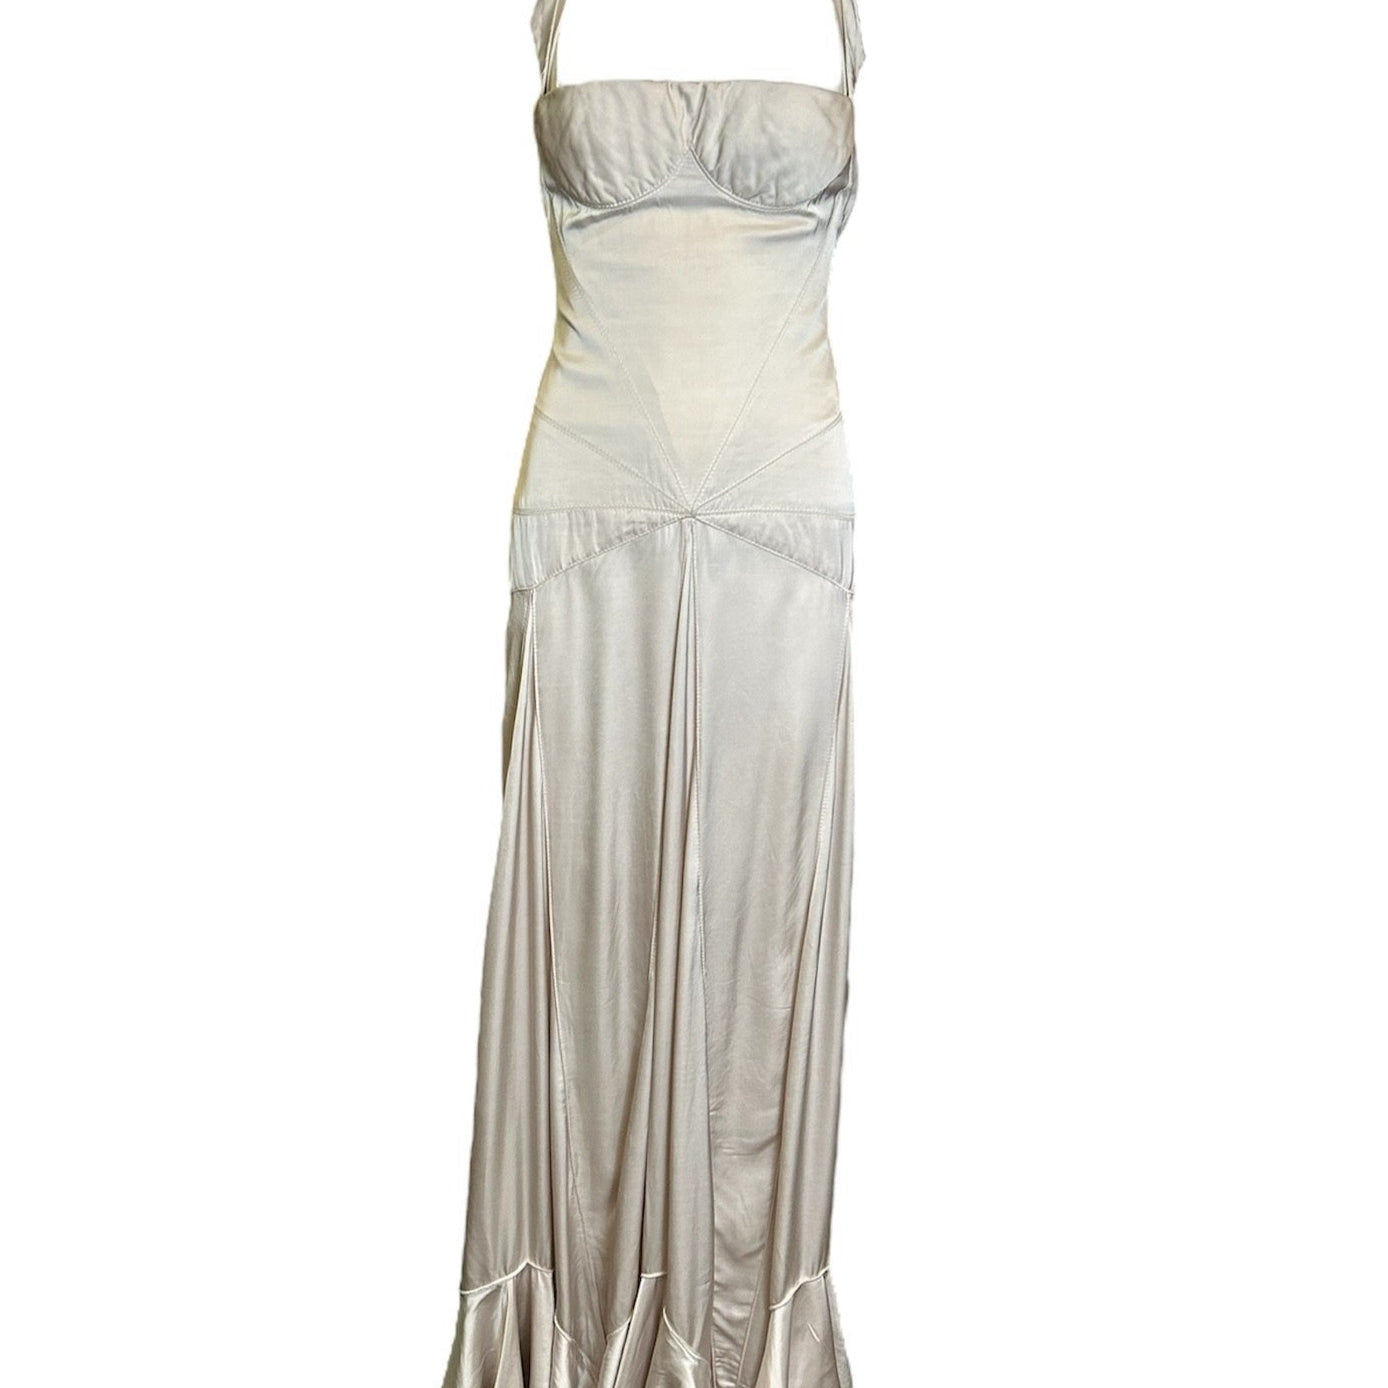  Gianfranco Ferre Silk Oyster Halter Gown FRONT PHOTO 1 OF 4